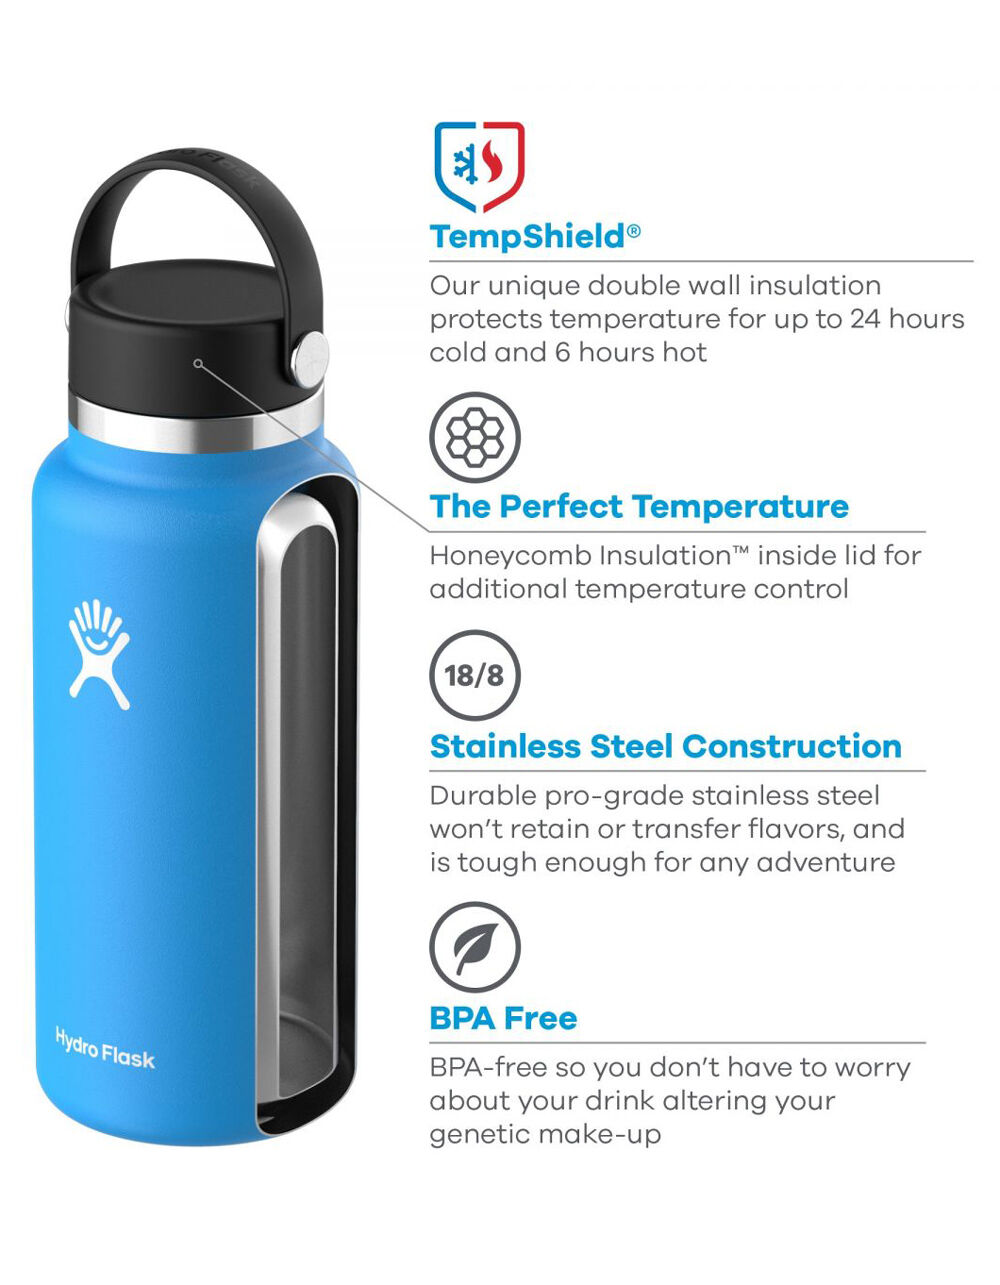 HYDRO FLASK Stone 32 oz Wide Mouth Water Bottle image number 1